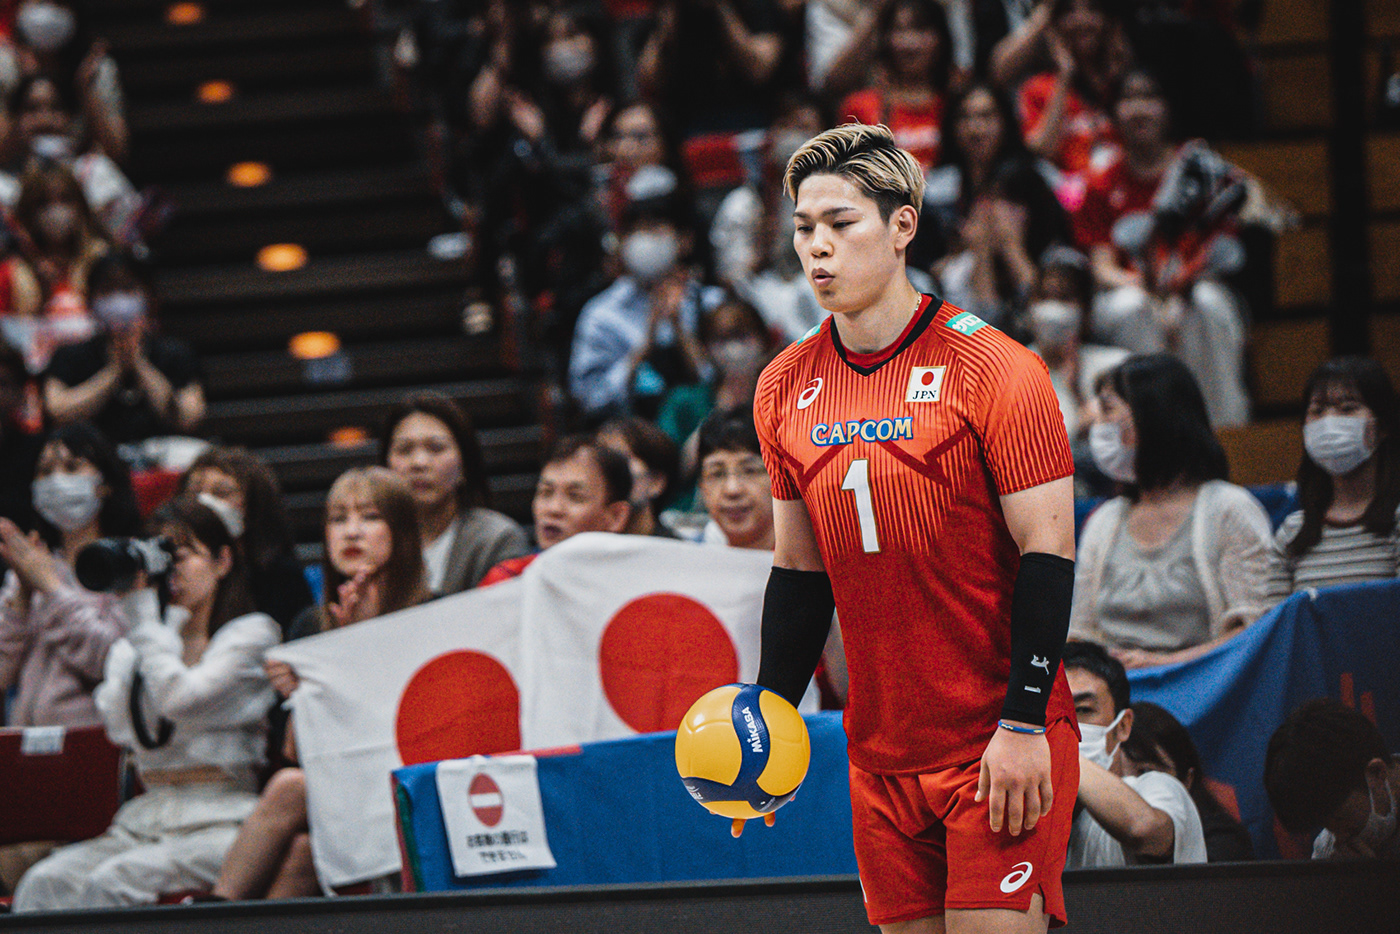 VNL volleyball sports Nippon teamjapan volleyballplayer